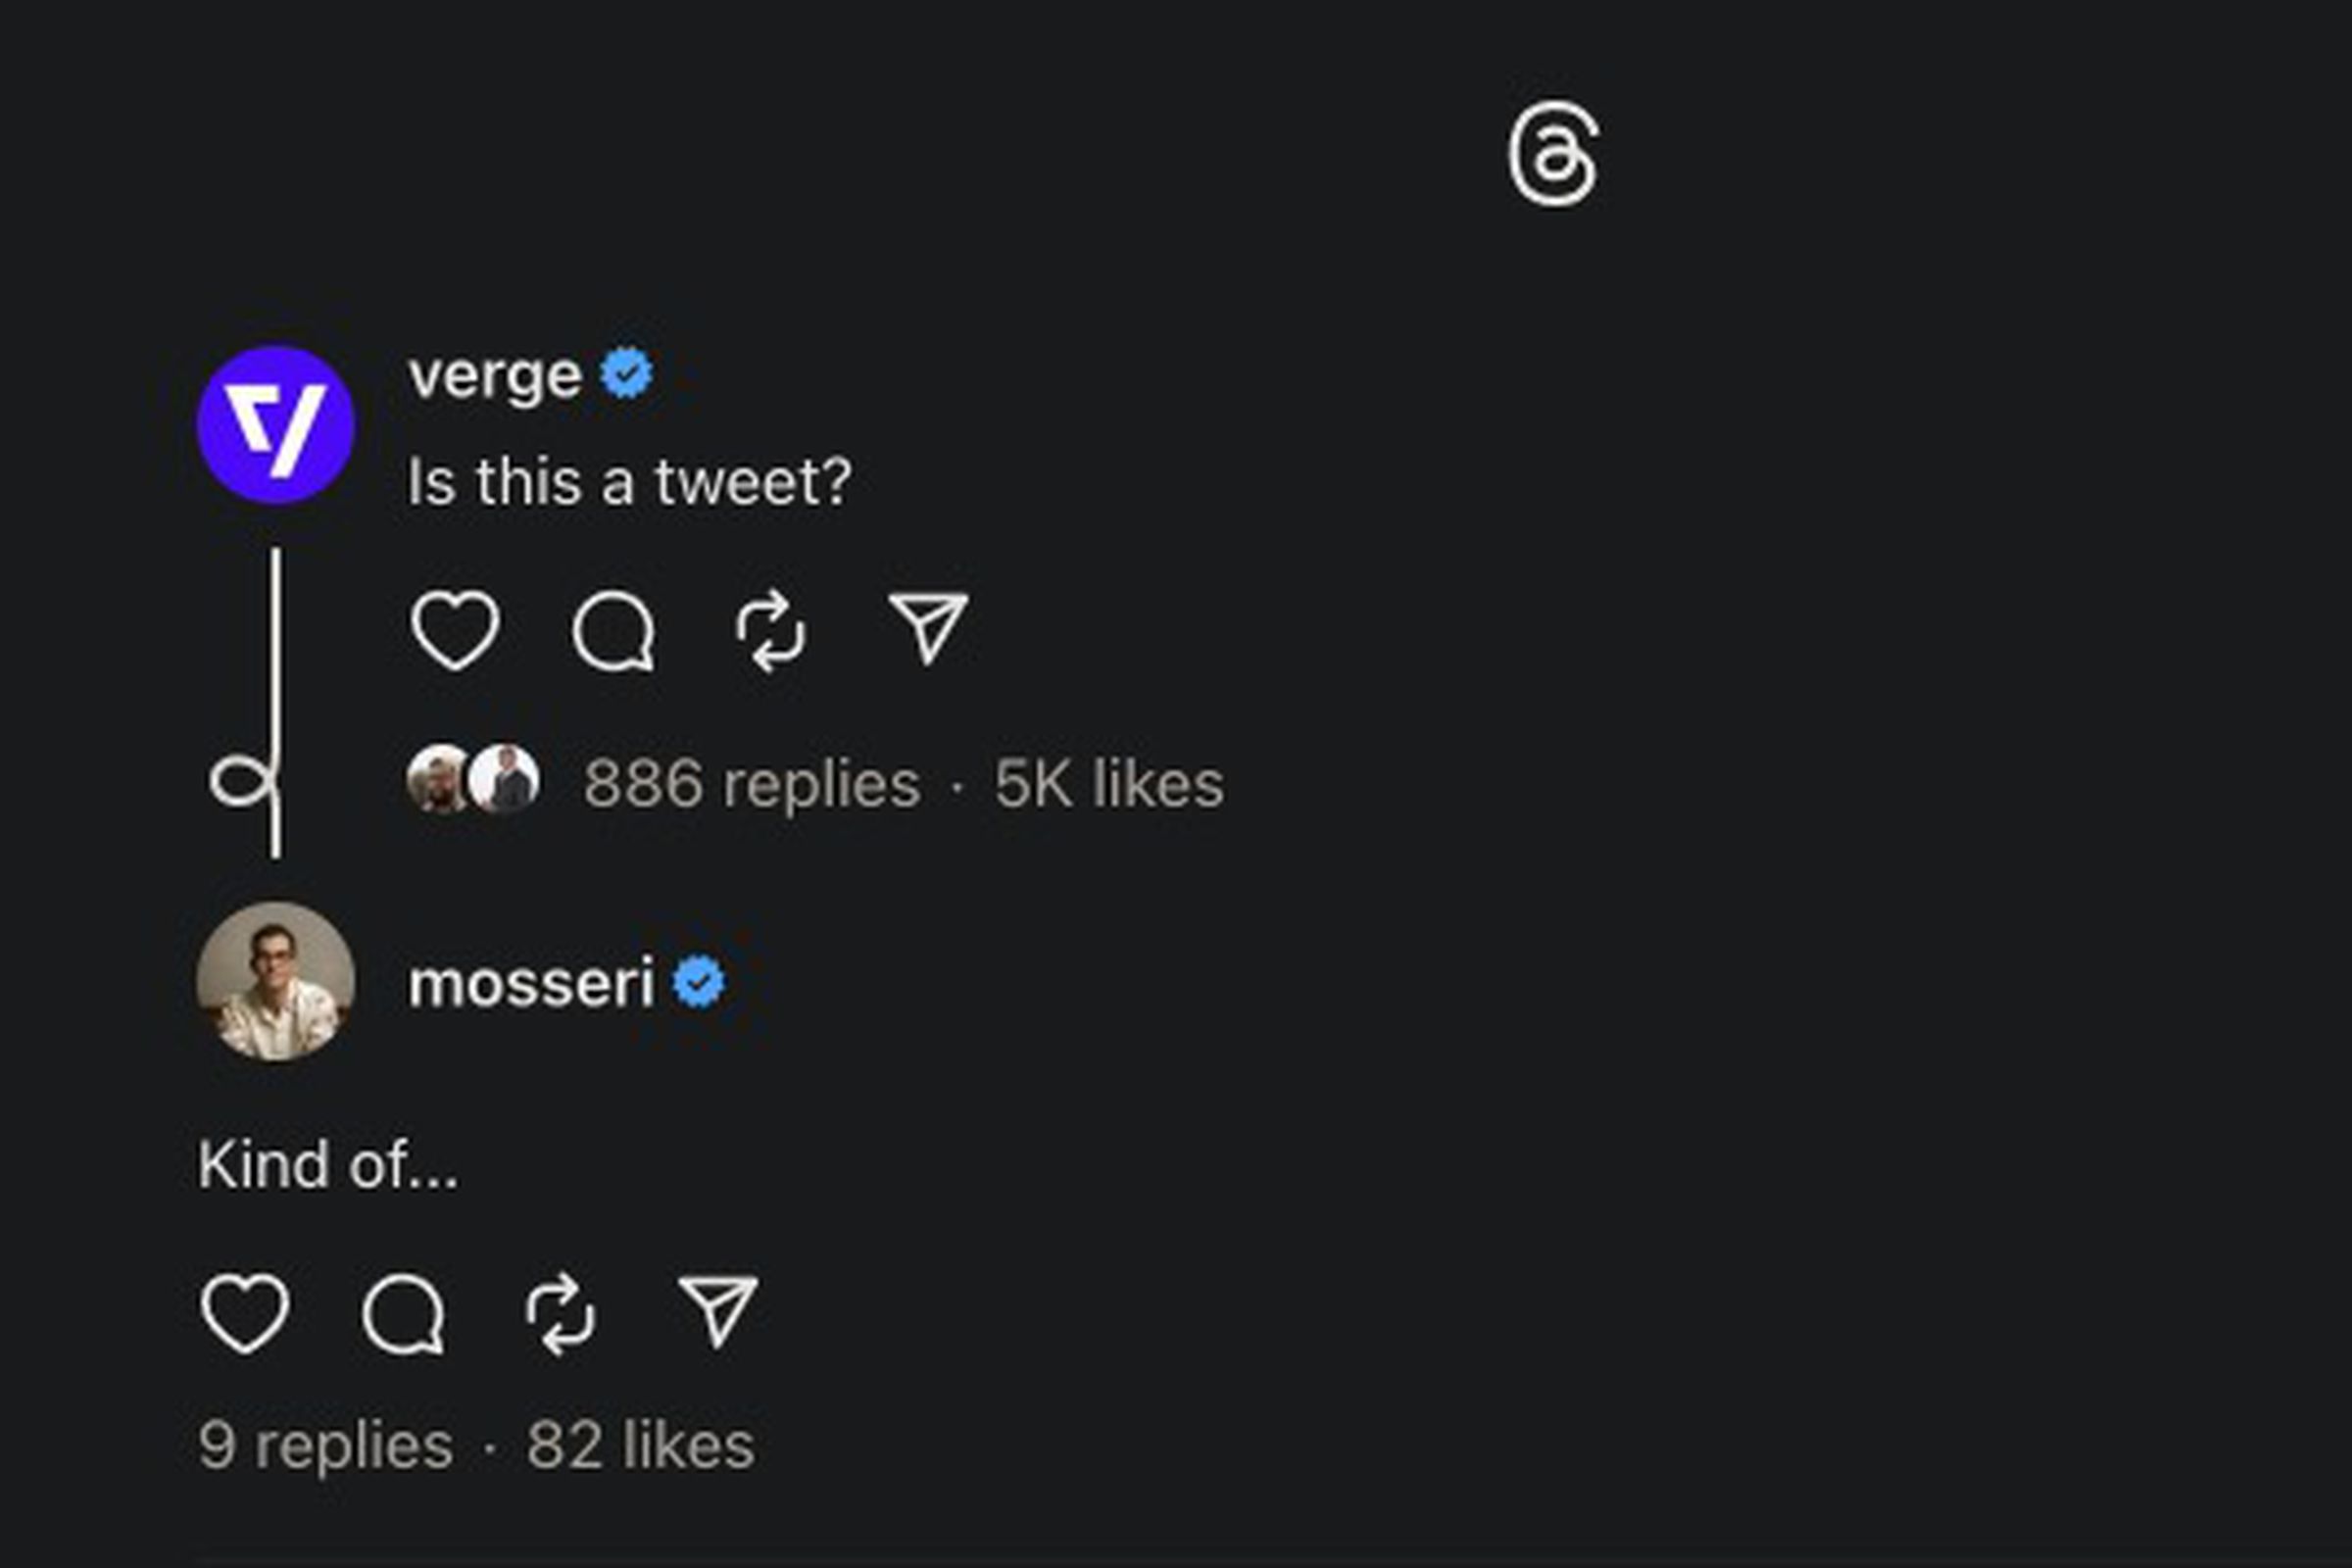 The Verge account asks “is this a tweet?” and Adam Mosseri replies “kind of...”